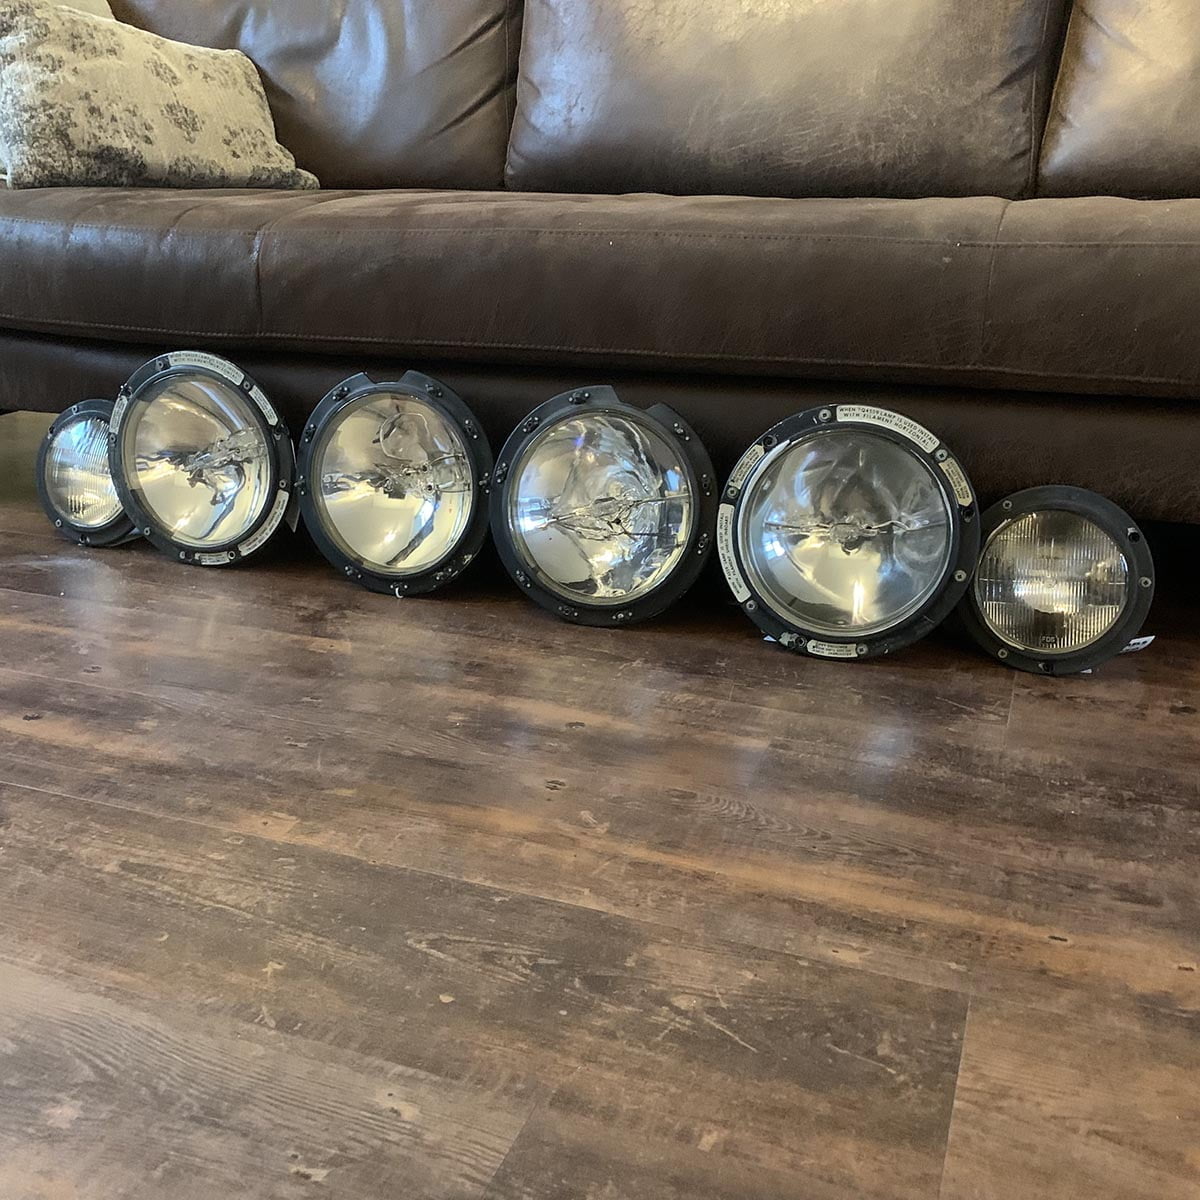 Overview of Boeing 737 lights for sale.